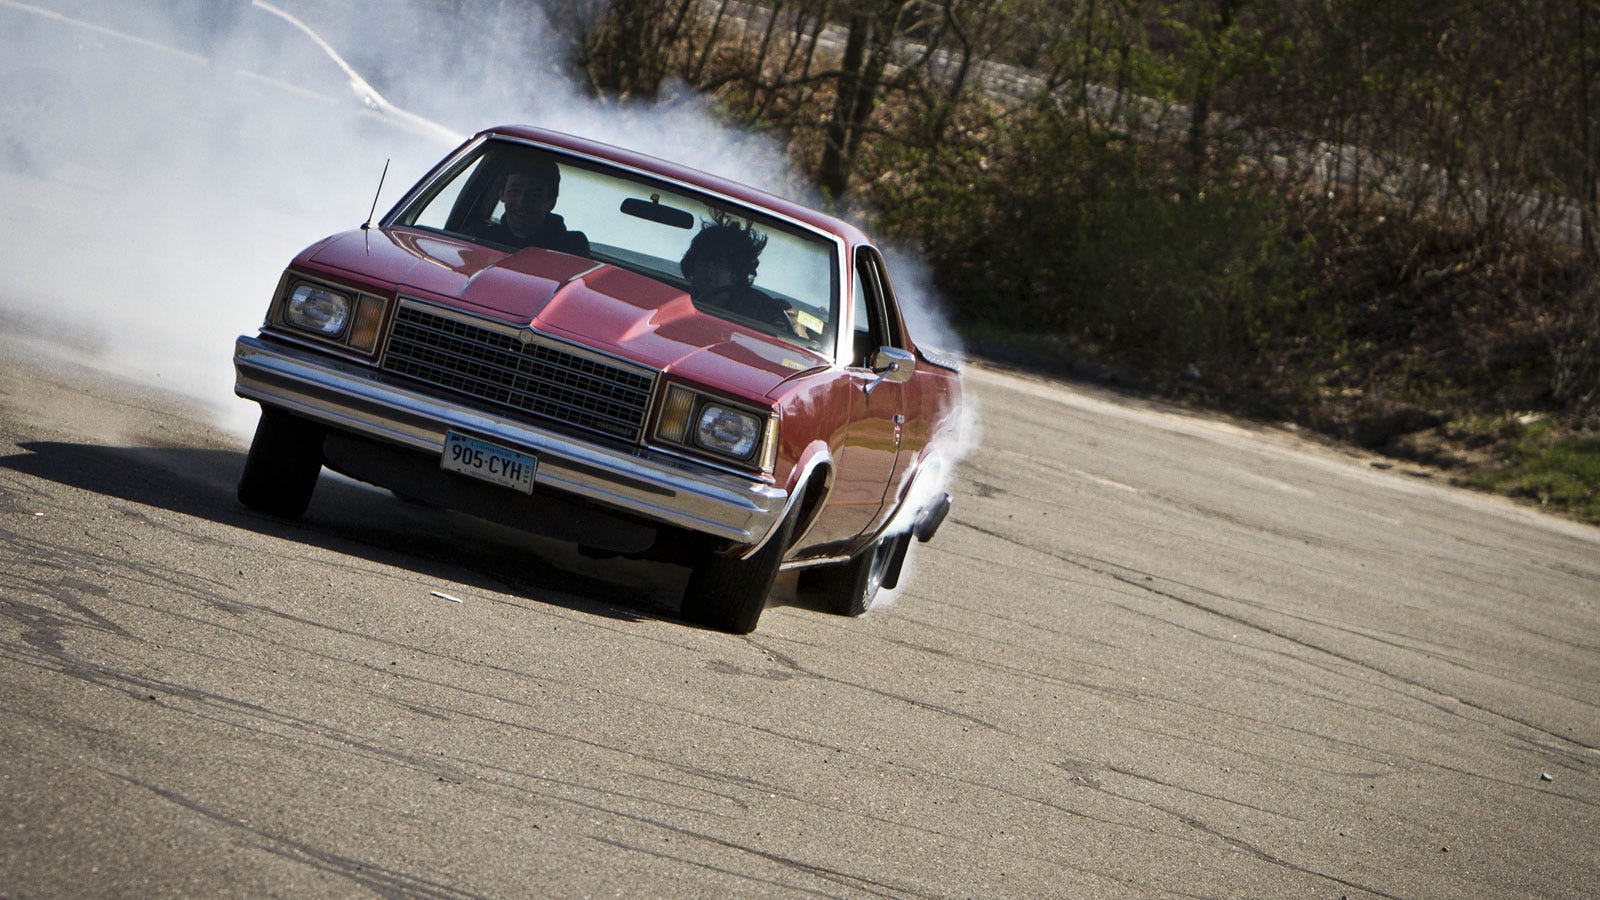 Your ridiculously awesome El Camino wallpaper is here